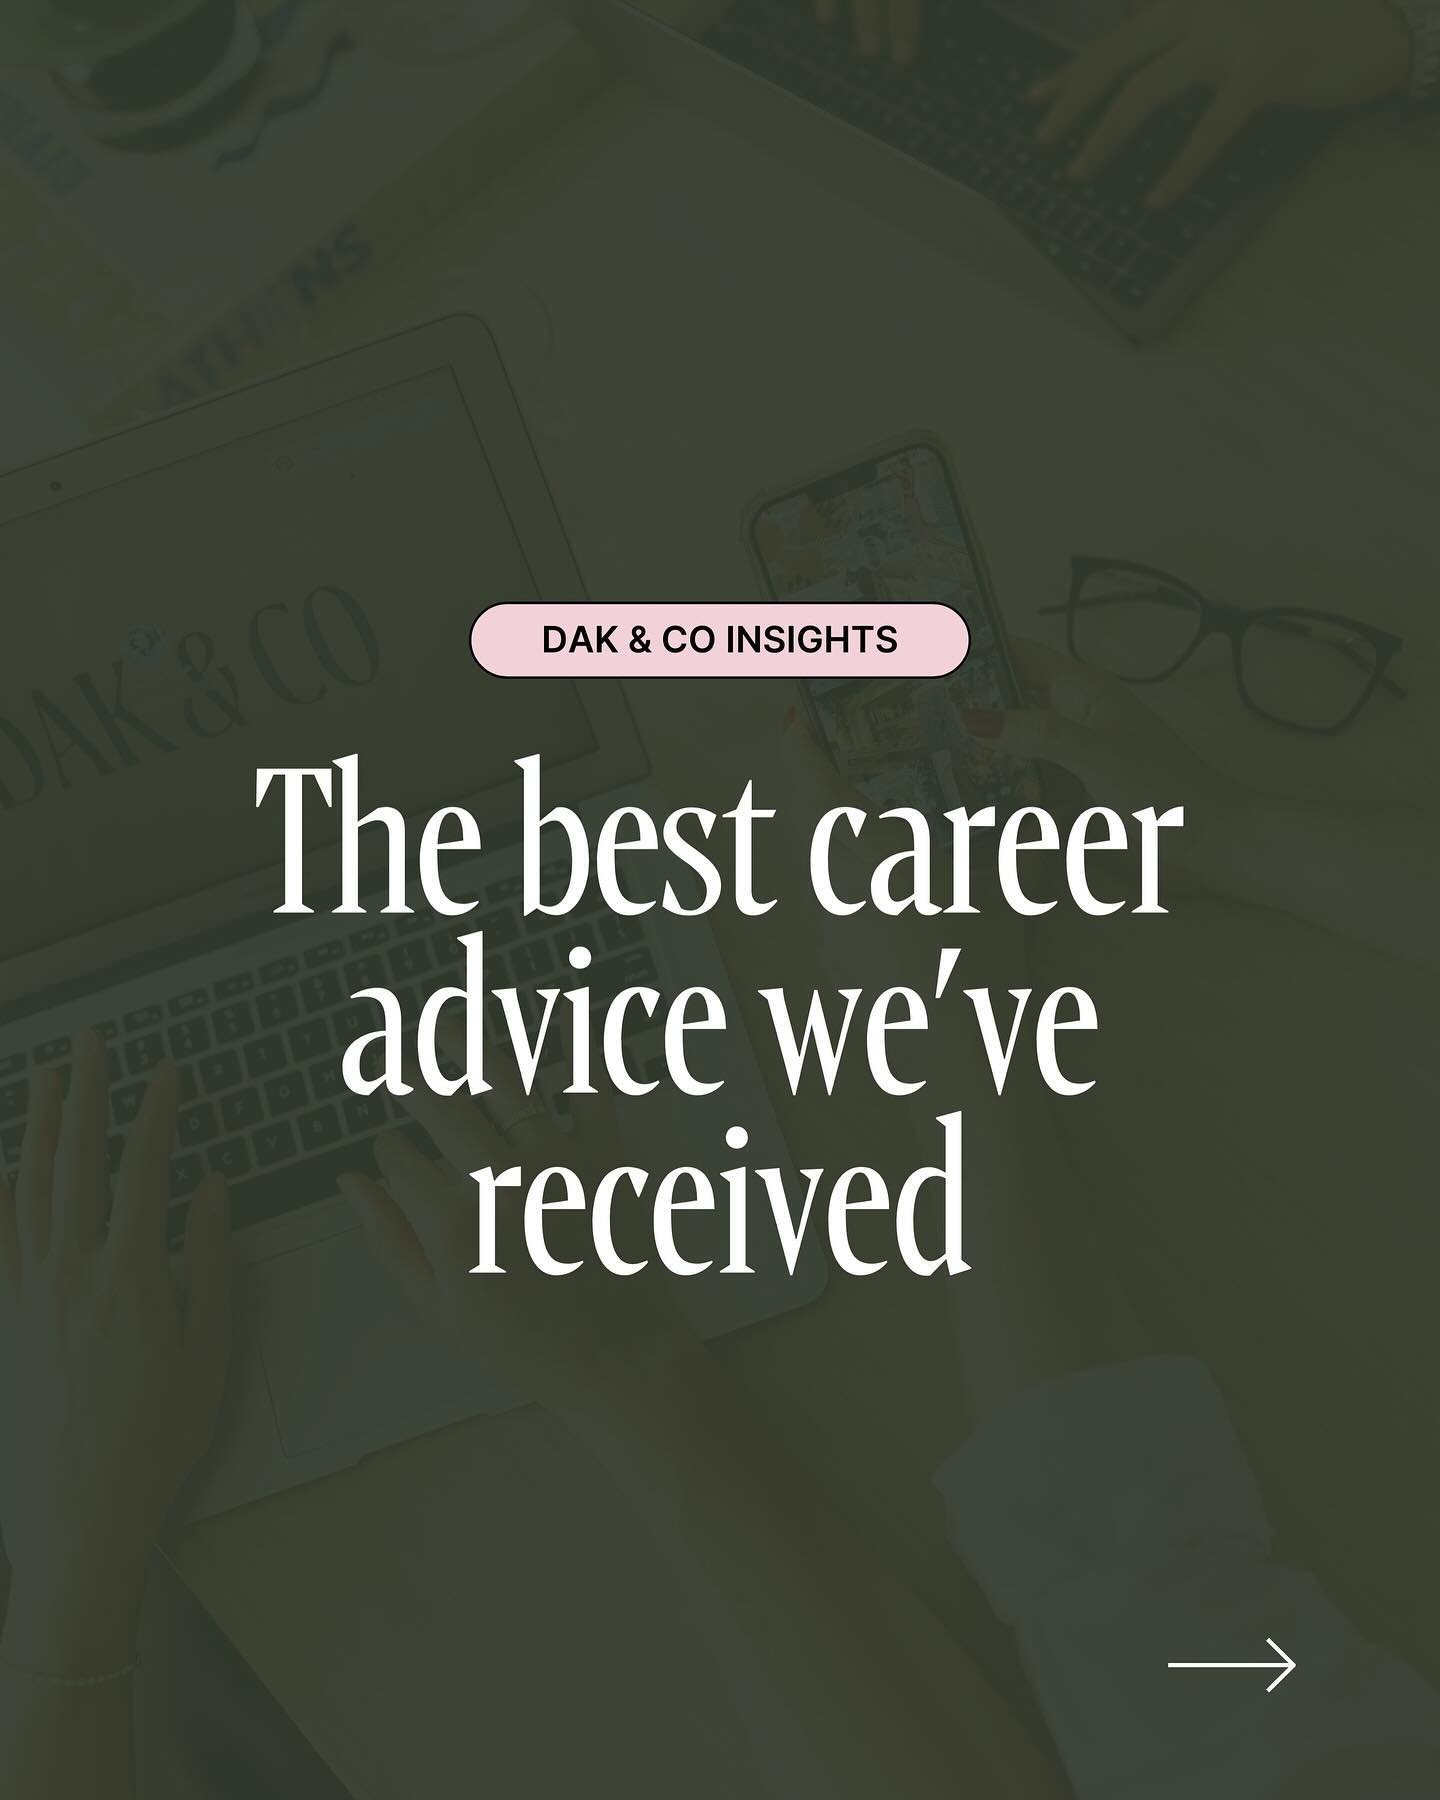 We&rsquo;re starting the week strong with a dose of career wisdom. 🤓👏🏻